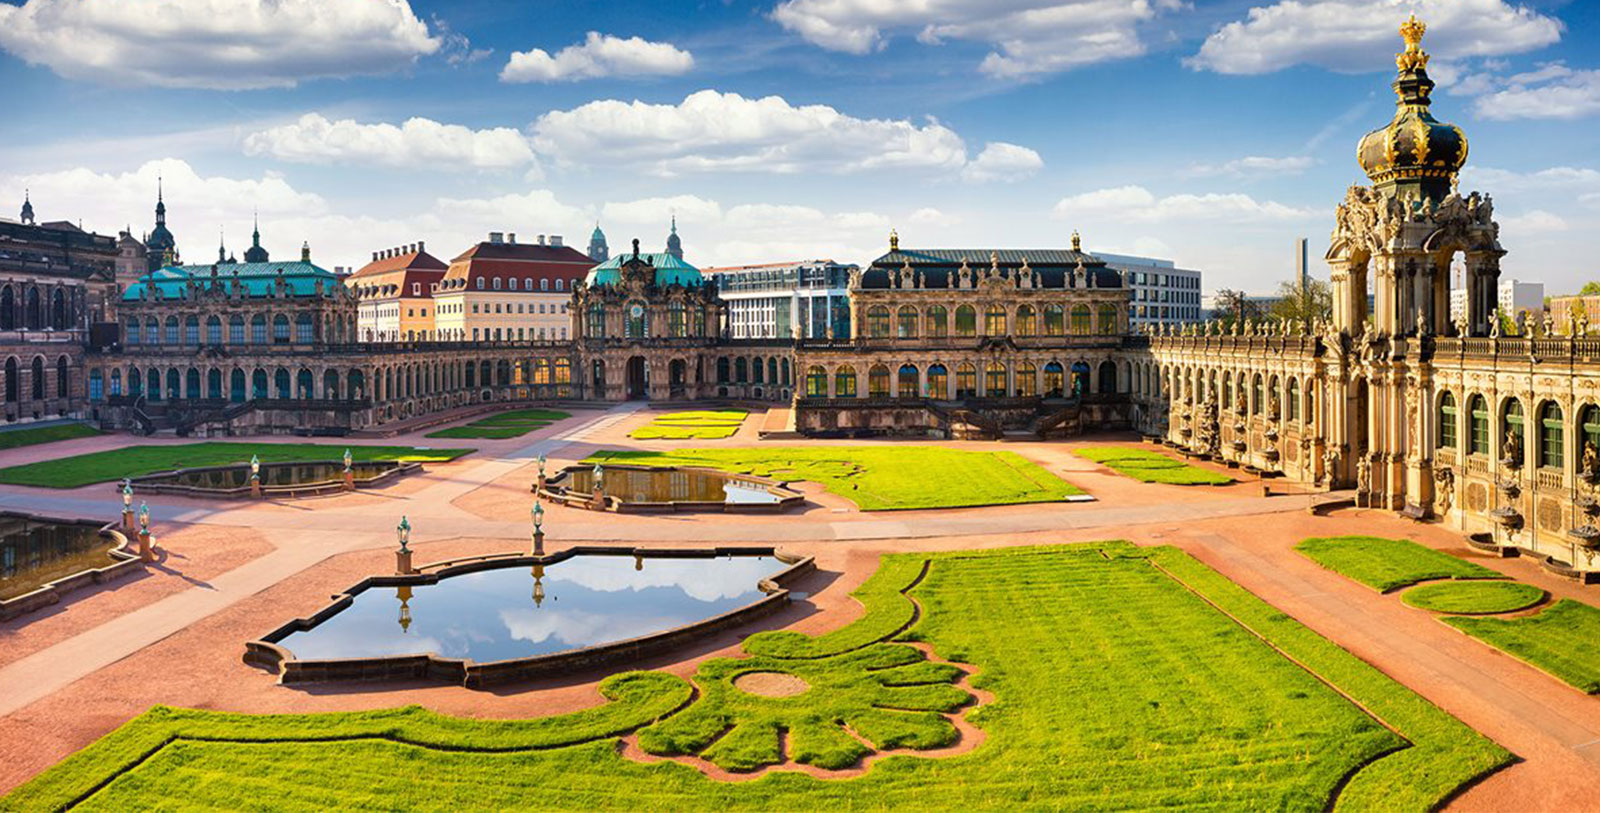 Explore the magnificent Zwinger just moments away.